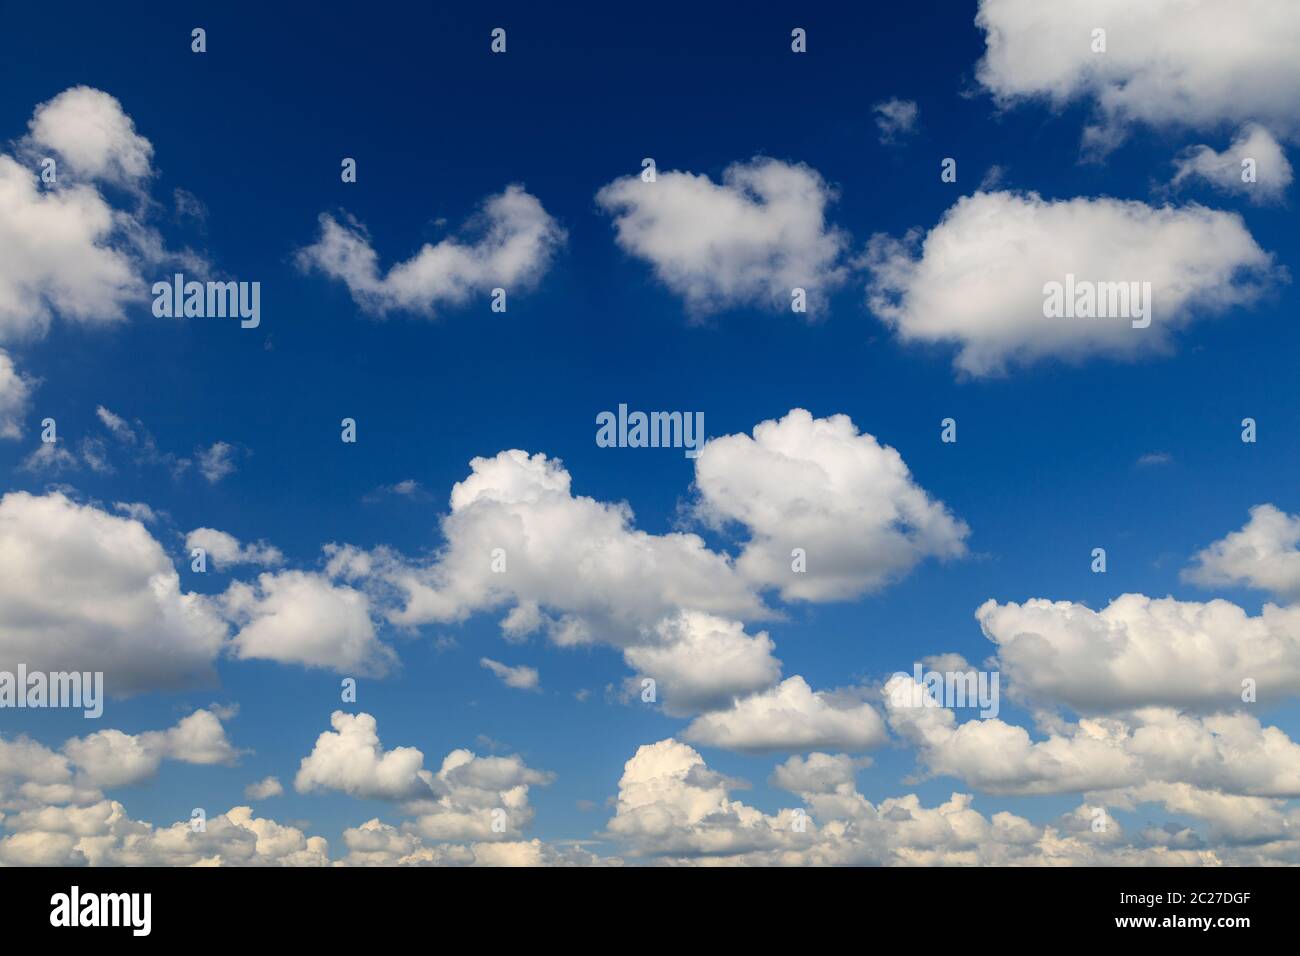 Beautiful blue sky with white fluffy clouds background. Stock Photo